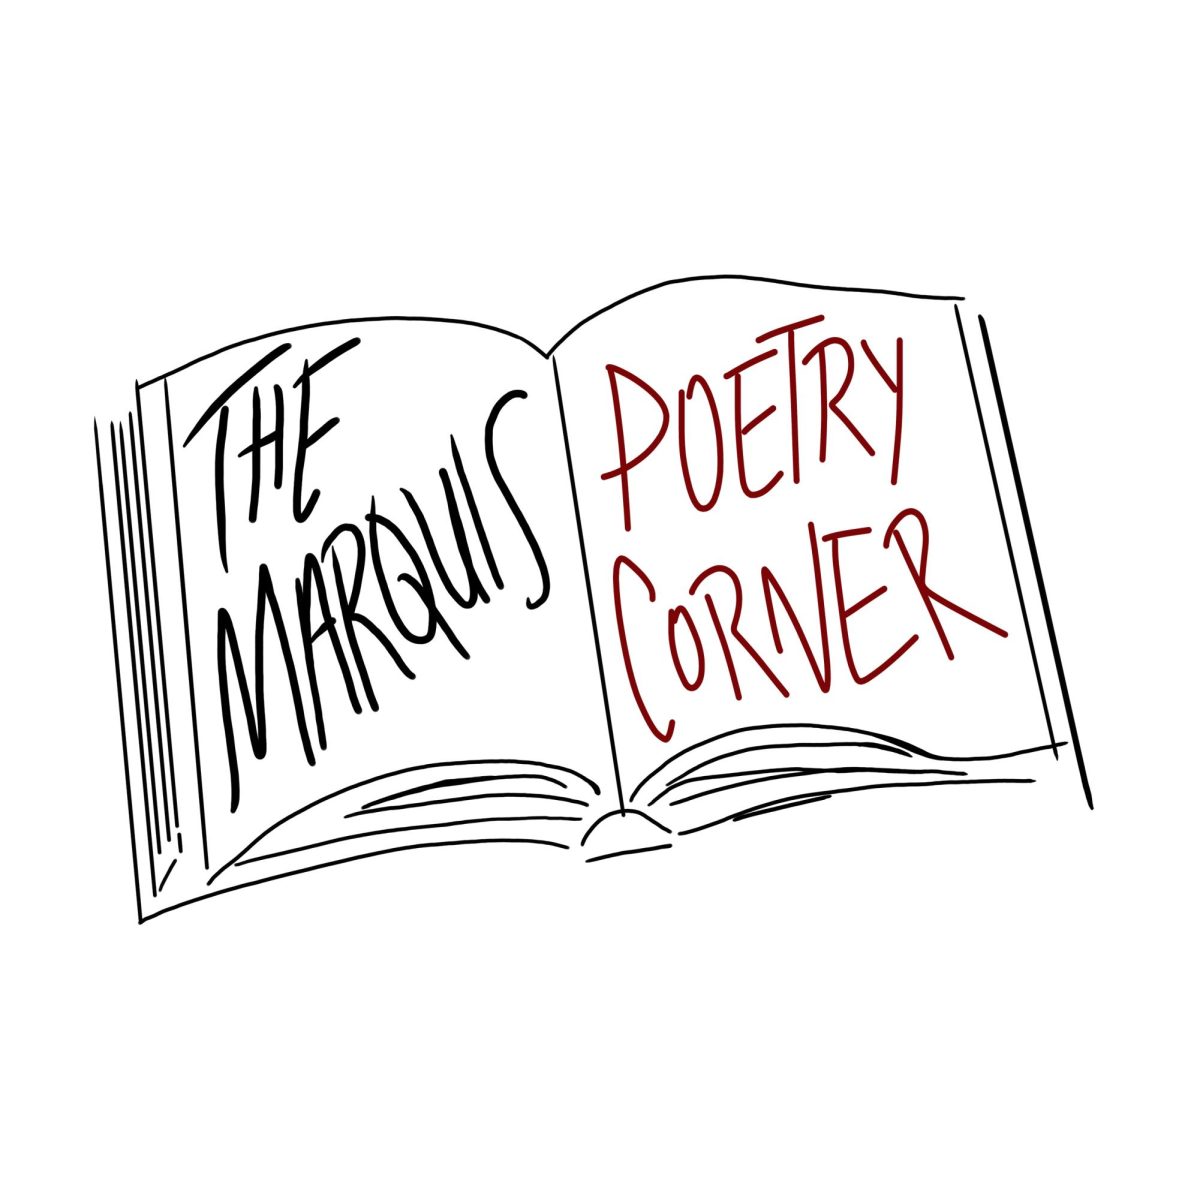 Marquis+Poetry+Corner%3A+%E2%80%98an+elegy+i+did+not+want+to+sing%E2%80%99